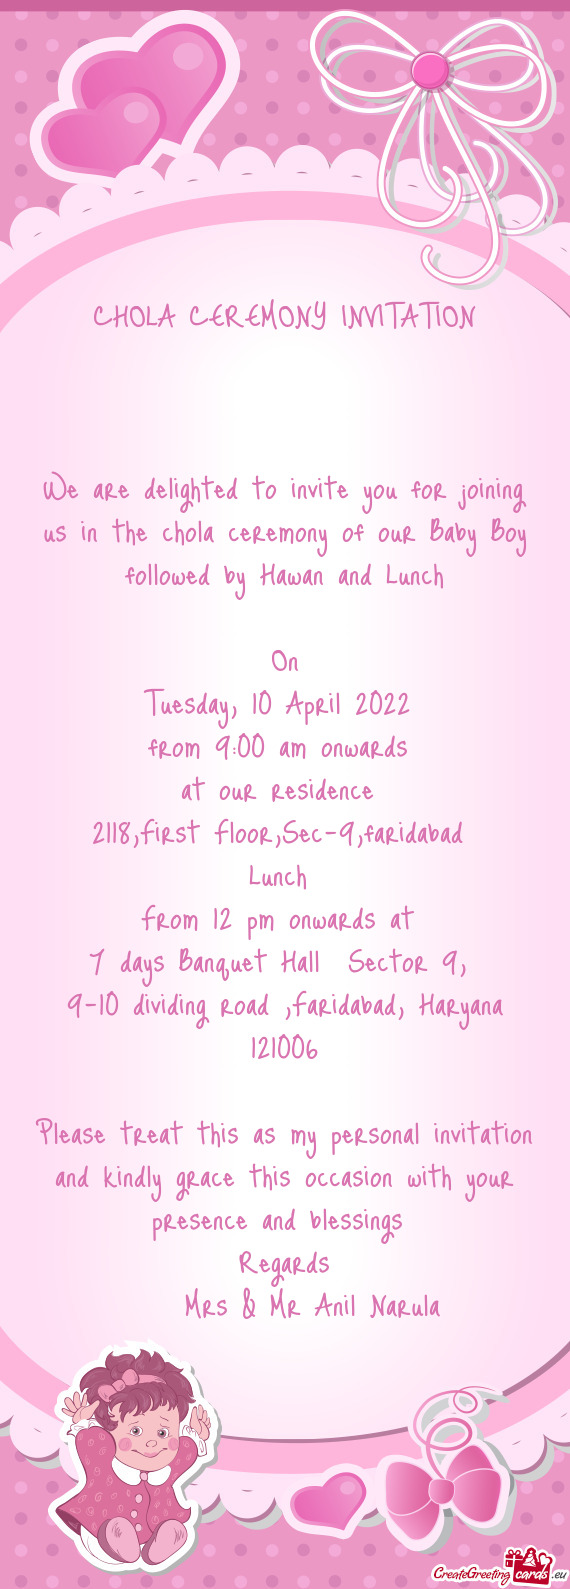 We are delighted to invite you for joining us in the chola ceremony of our Baby Boy followed by Hawa